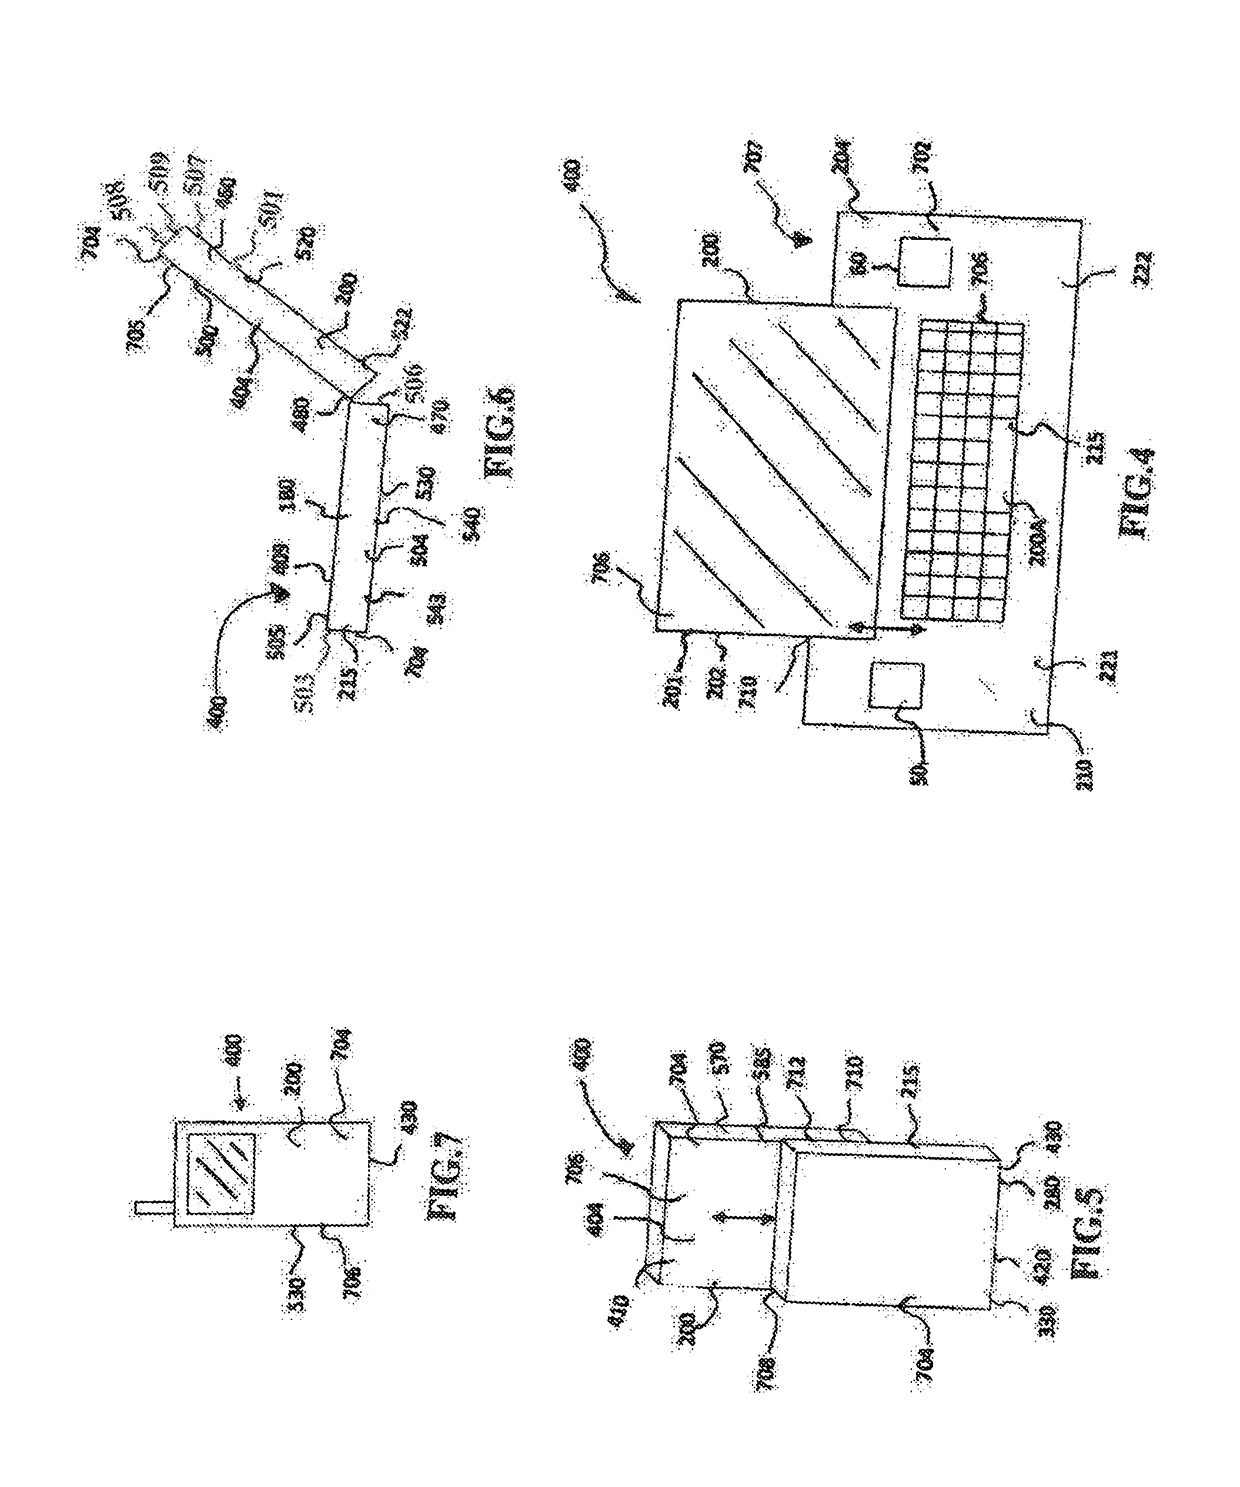 Energy harvesting substrate network and communication apparatus